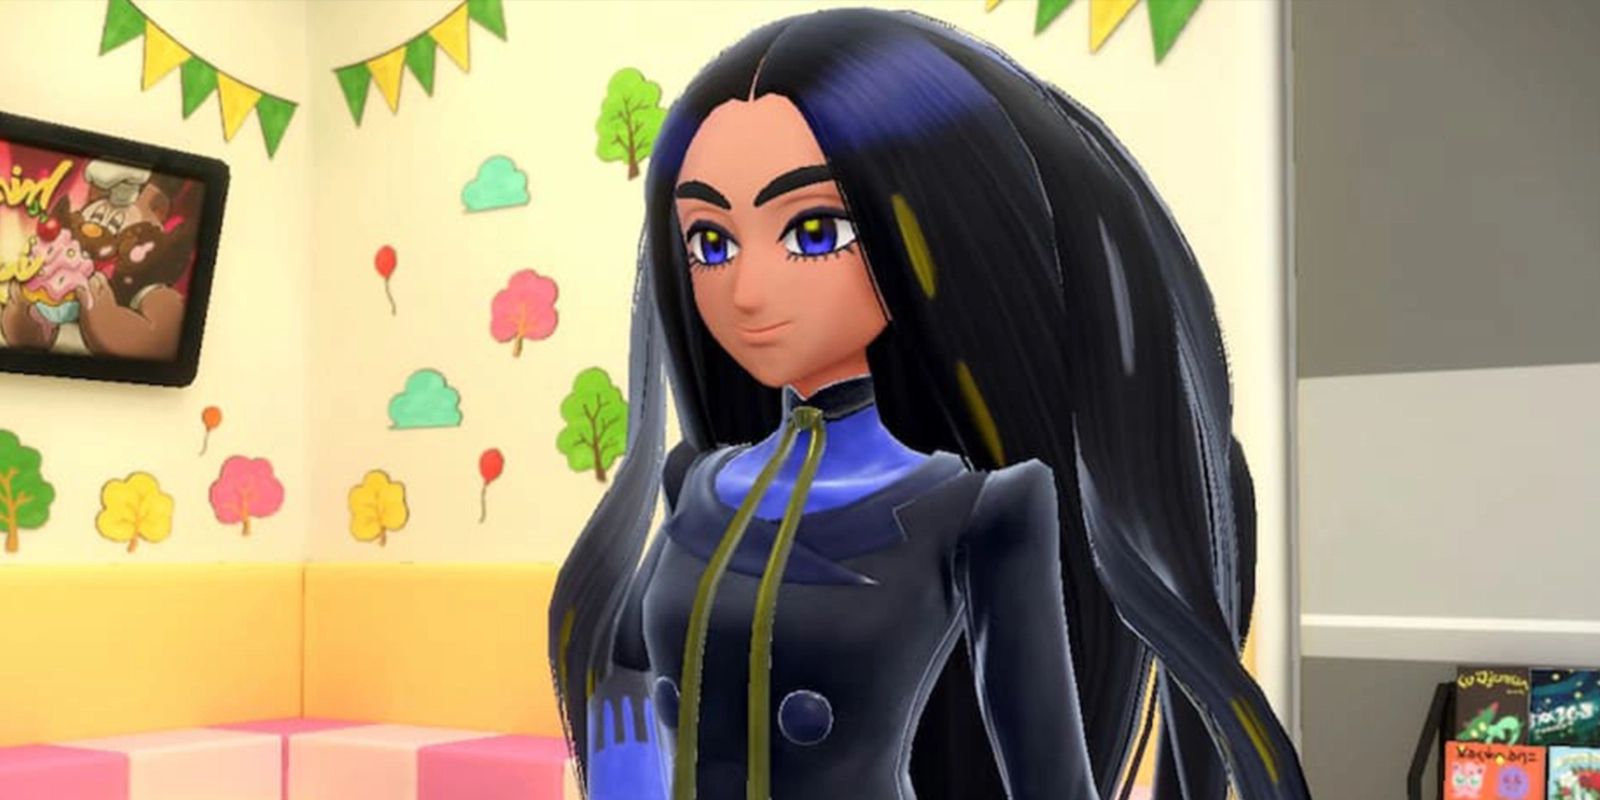 Geeta smiling with one hand on her waist in Pokémon Scarlet and Violet.